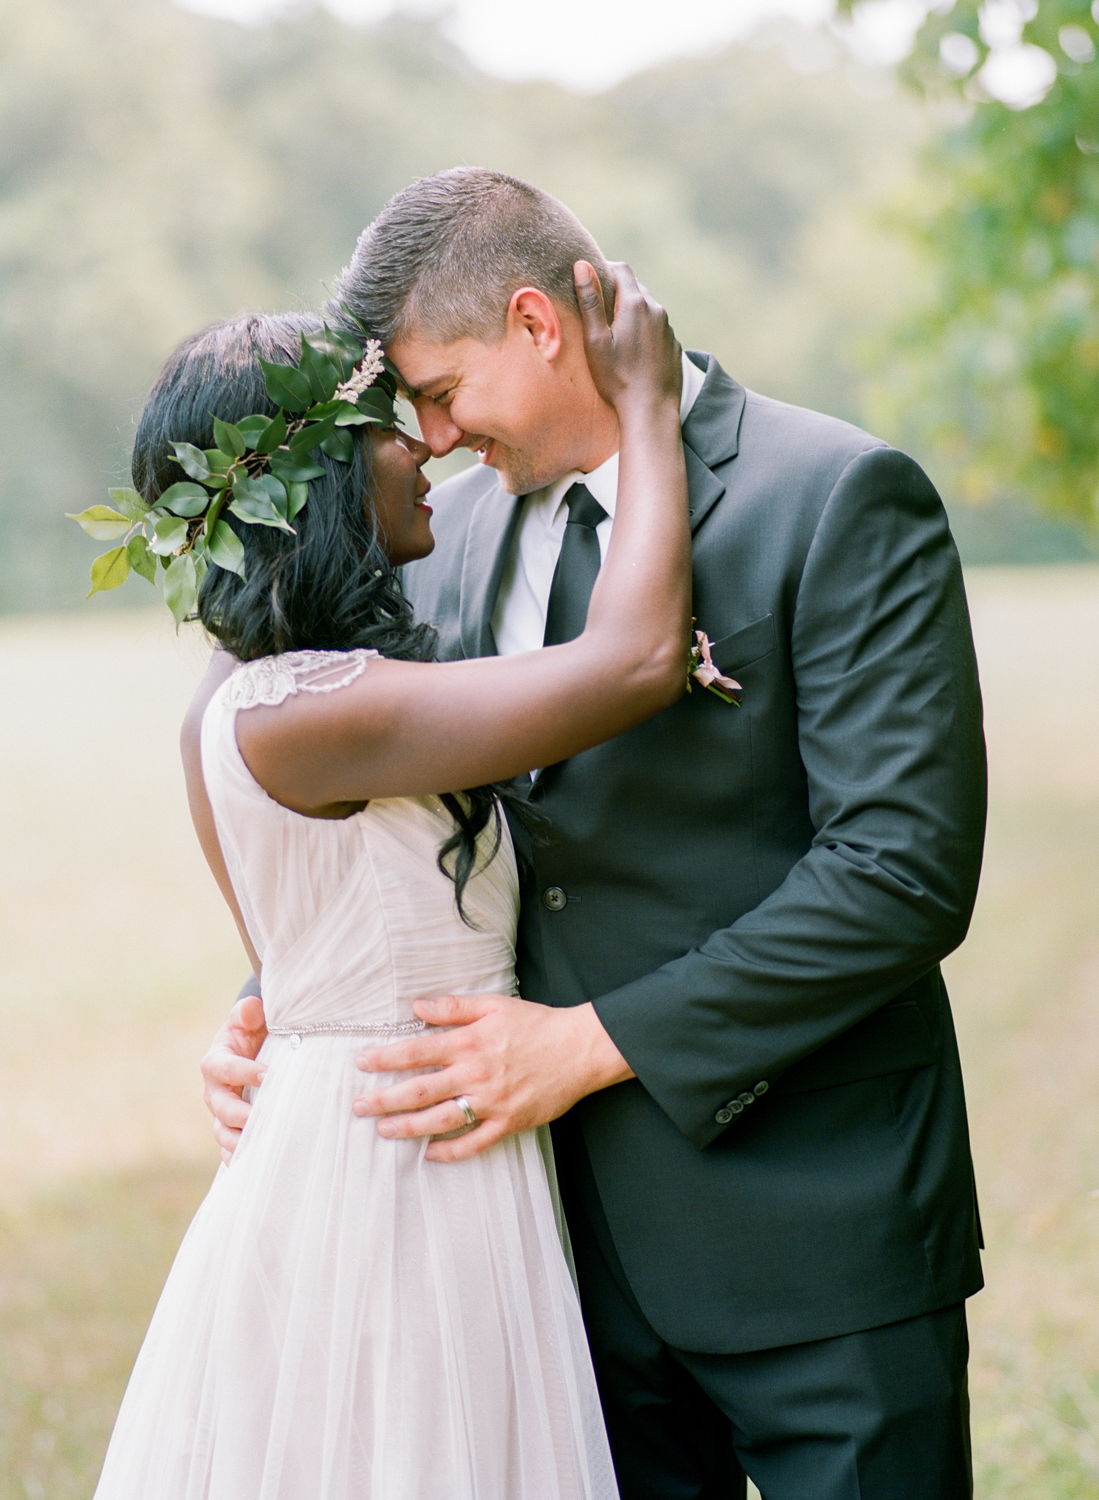 Bride and groom snuggling in a field, Erica Robnett Photography, film wedding photography